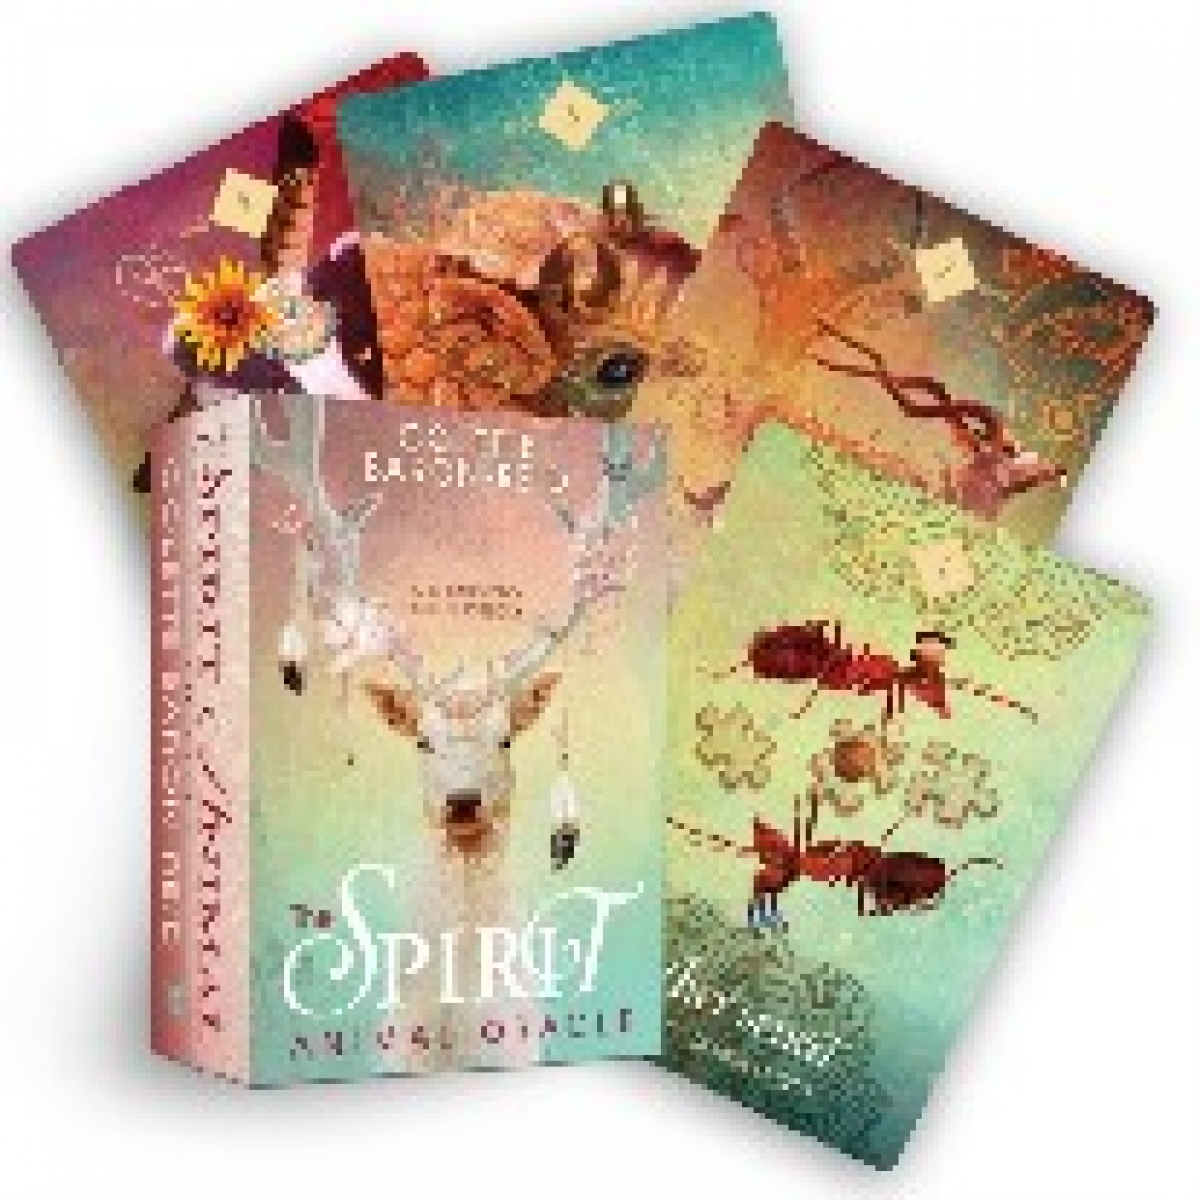 Colette, Baron Reid The Spirit Animal Oracle: A 68-Card Deck - Animal Spirit Cards with Guidebook 